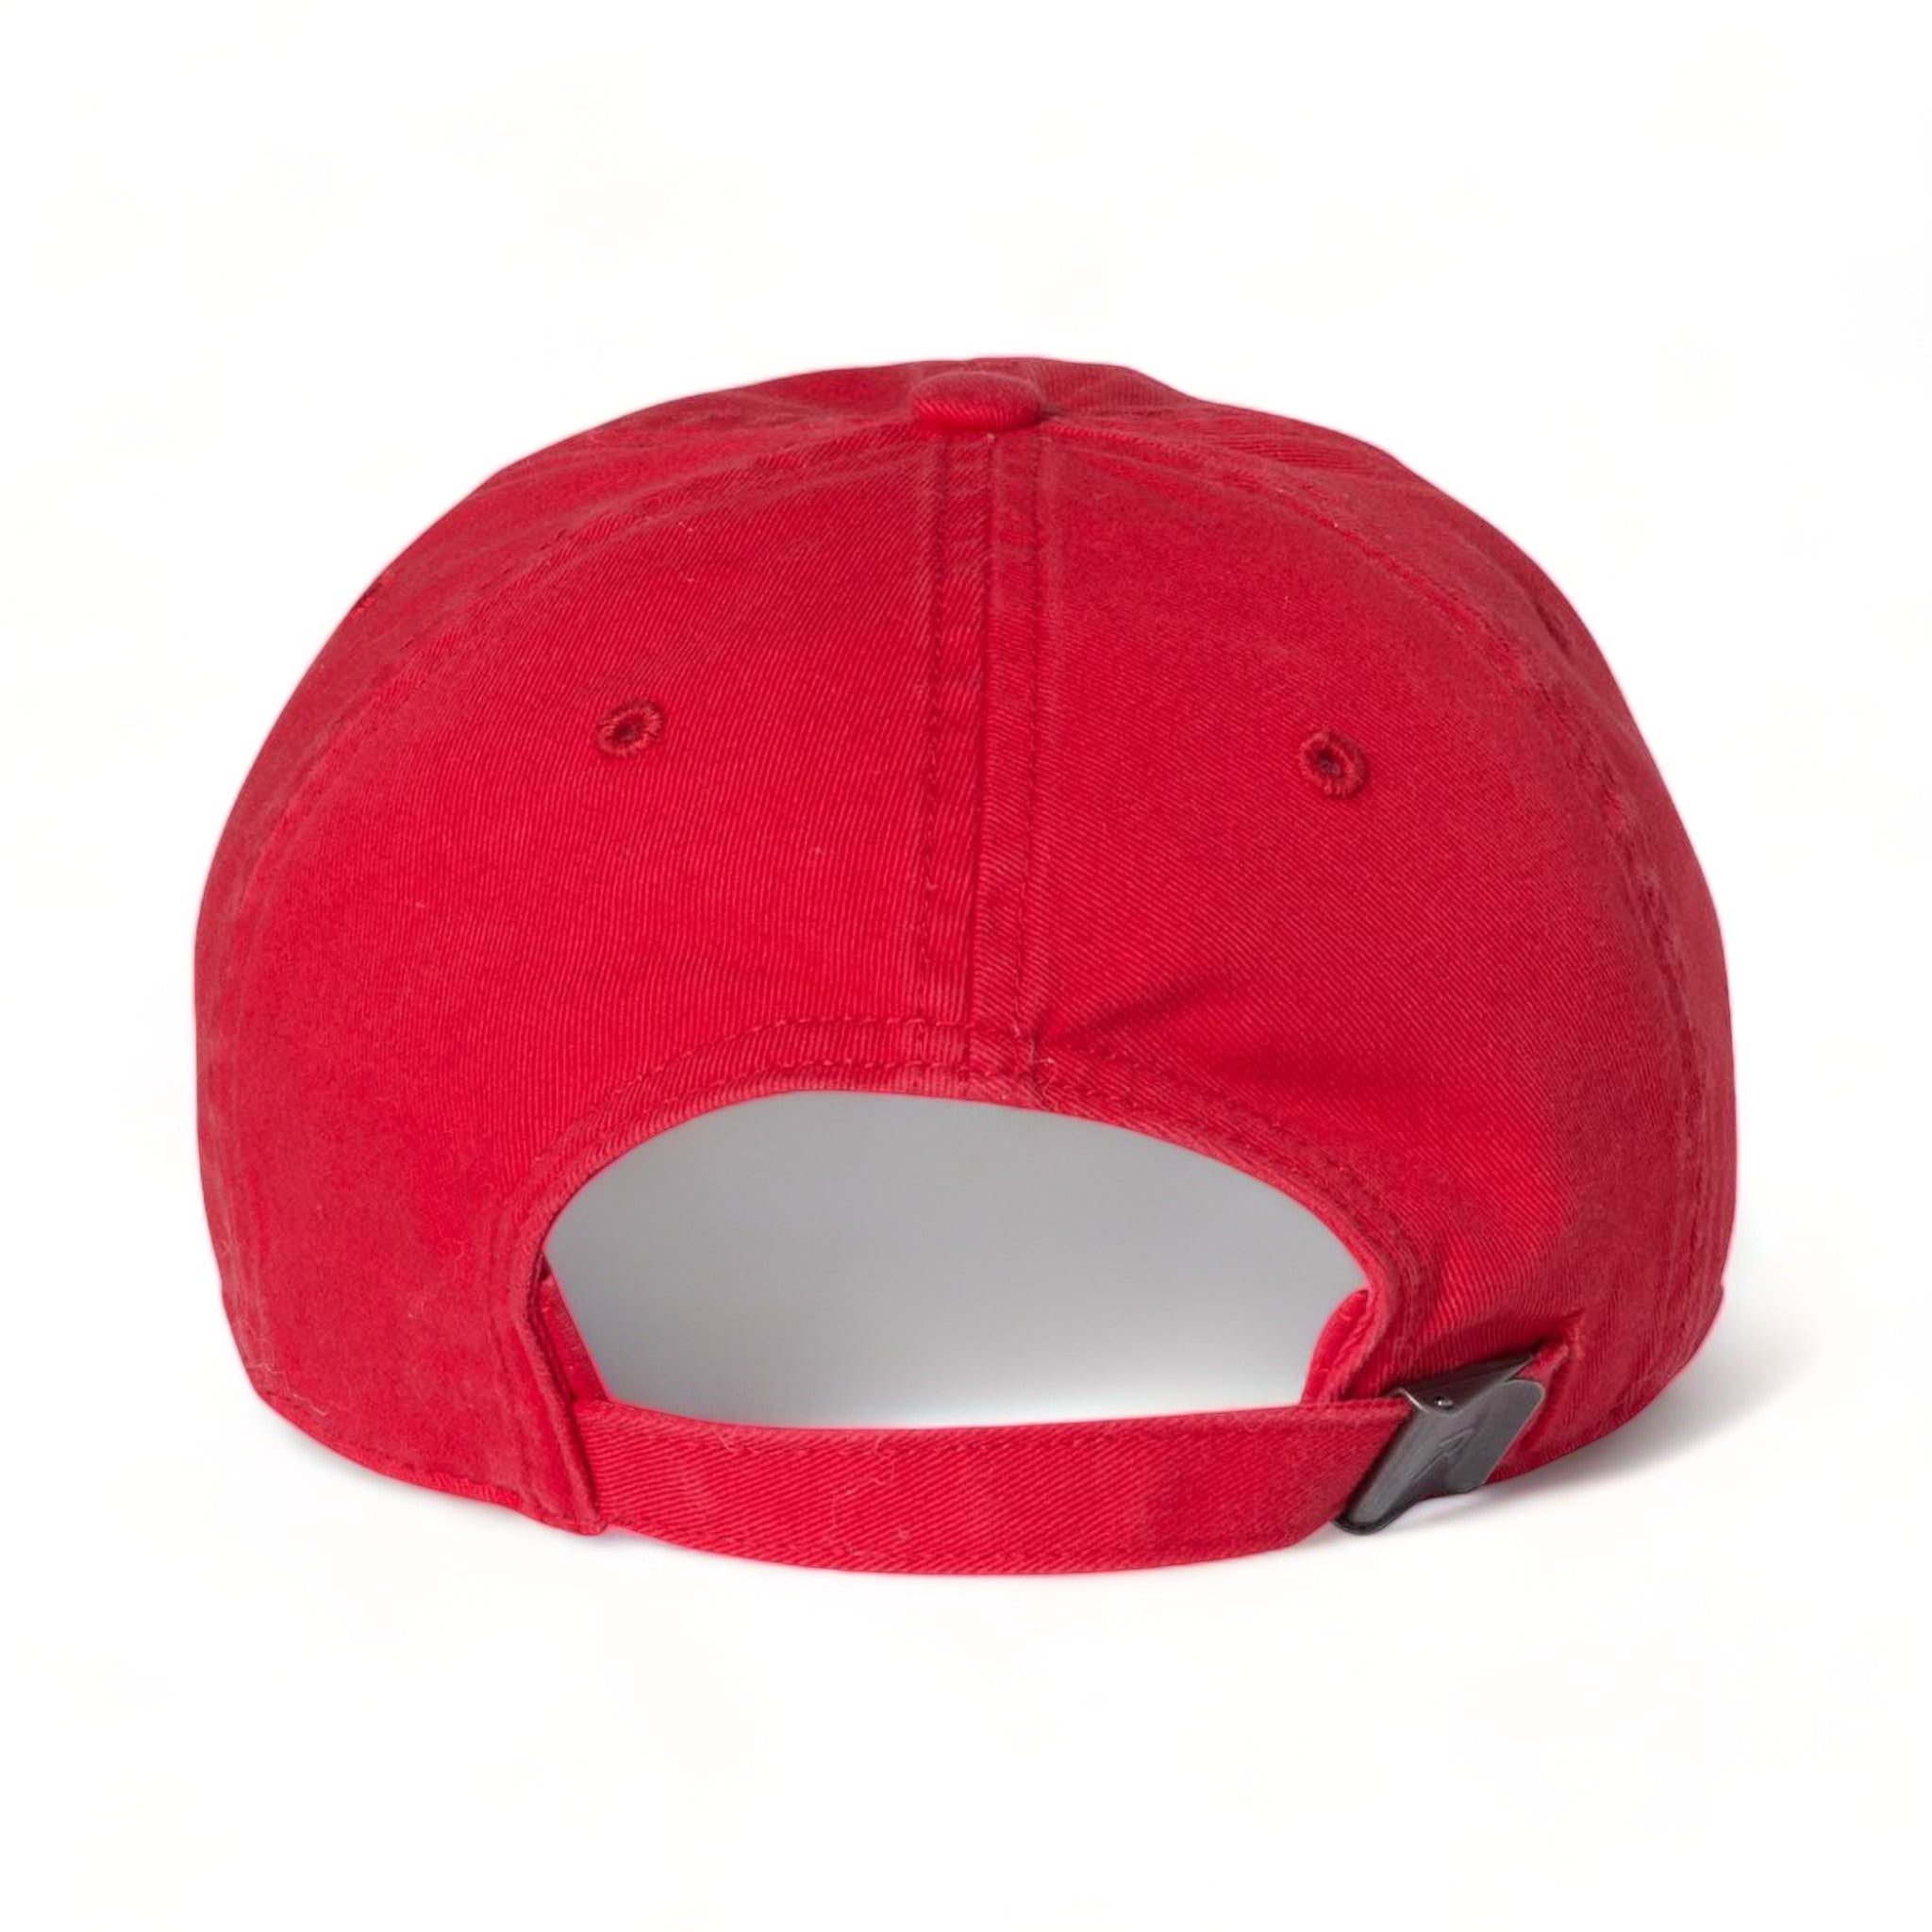 Back view of Richardson 320 custom hat in red